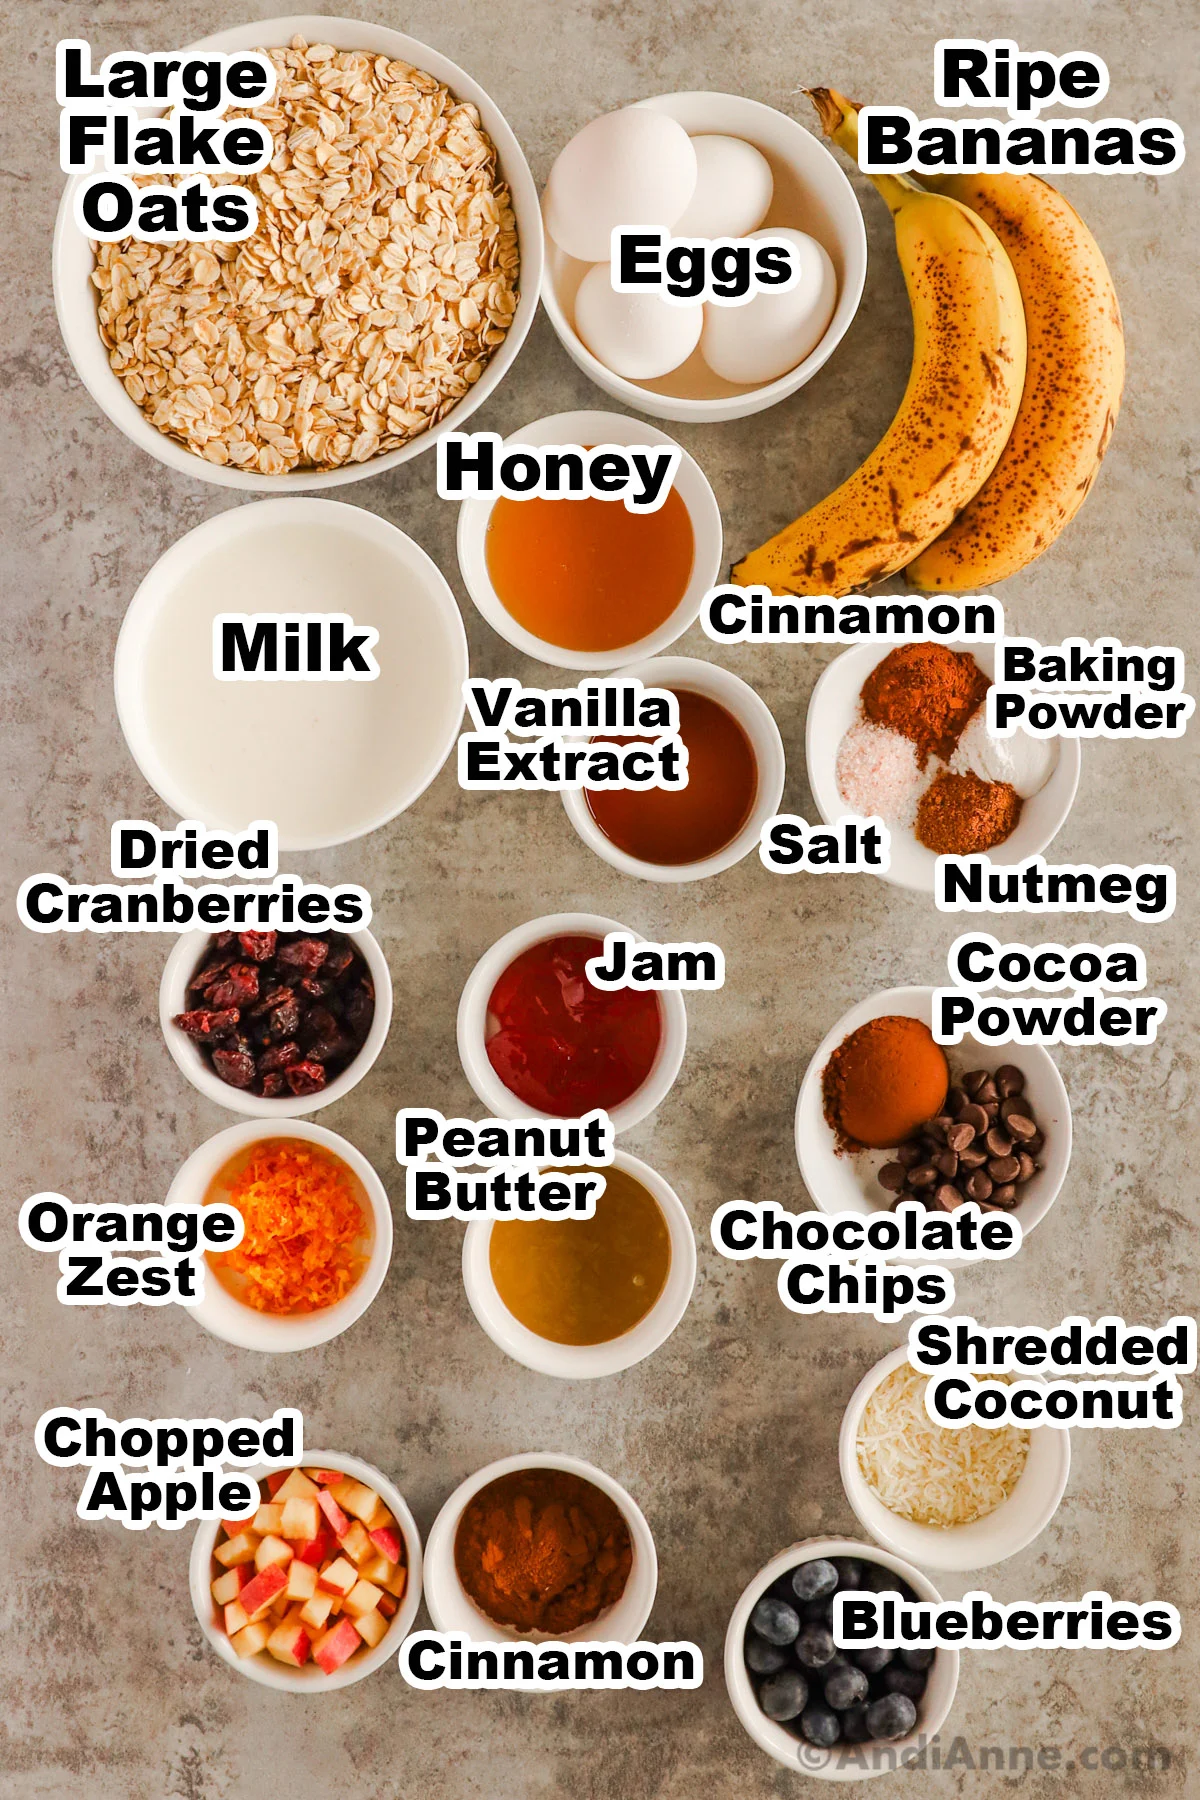 Recipe ingredients in bowls on counter including bowl of large flake oats, eggs, bananas, honey, milk, cinnamon, spices, jam, dried cranberries, peanut butter, chocolate chips, shredded coconut, apple, cinnamon and shredded coconut.